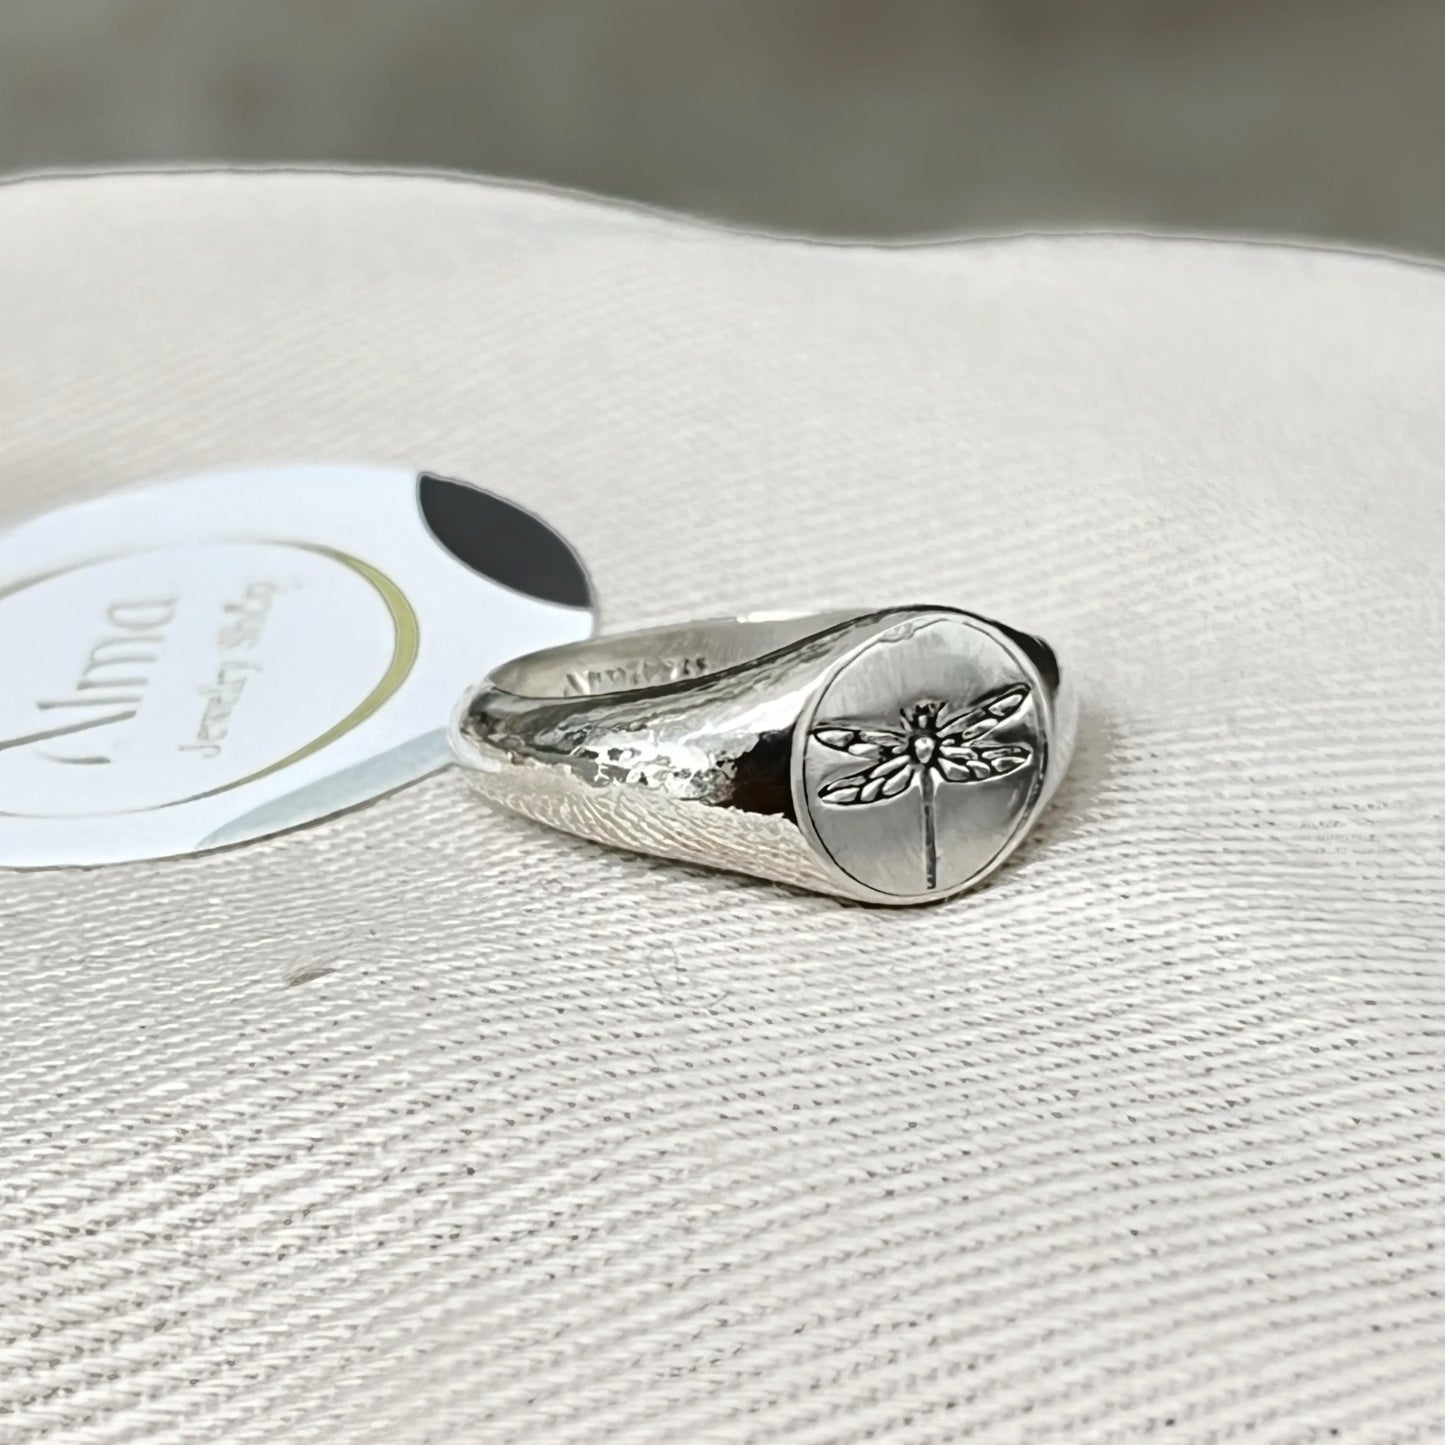 Engraved Dragonfly's Dance Signet Ring - Silver - AlmaJewelryShop